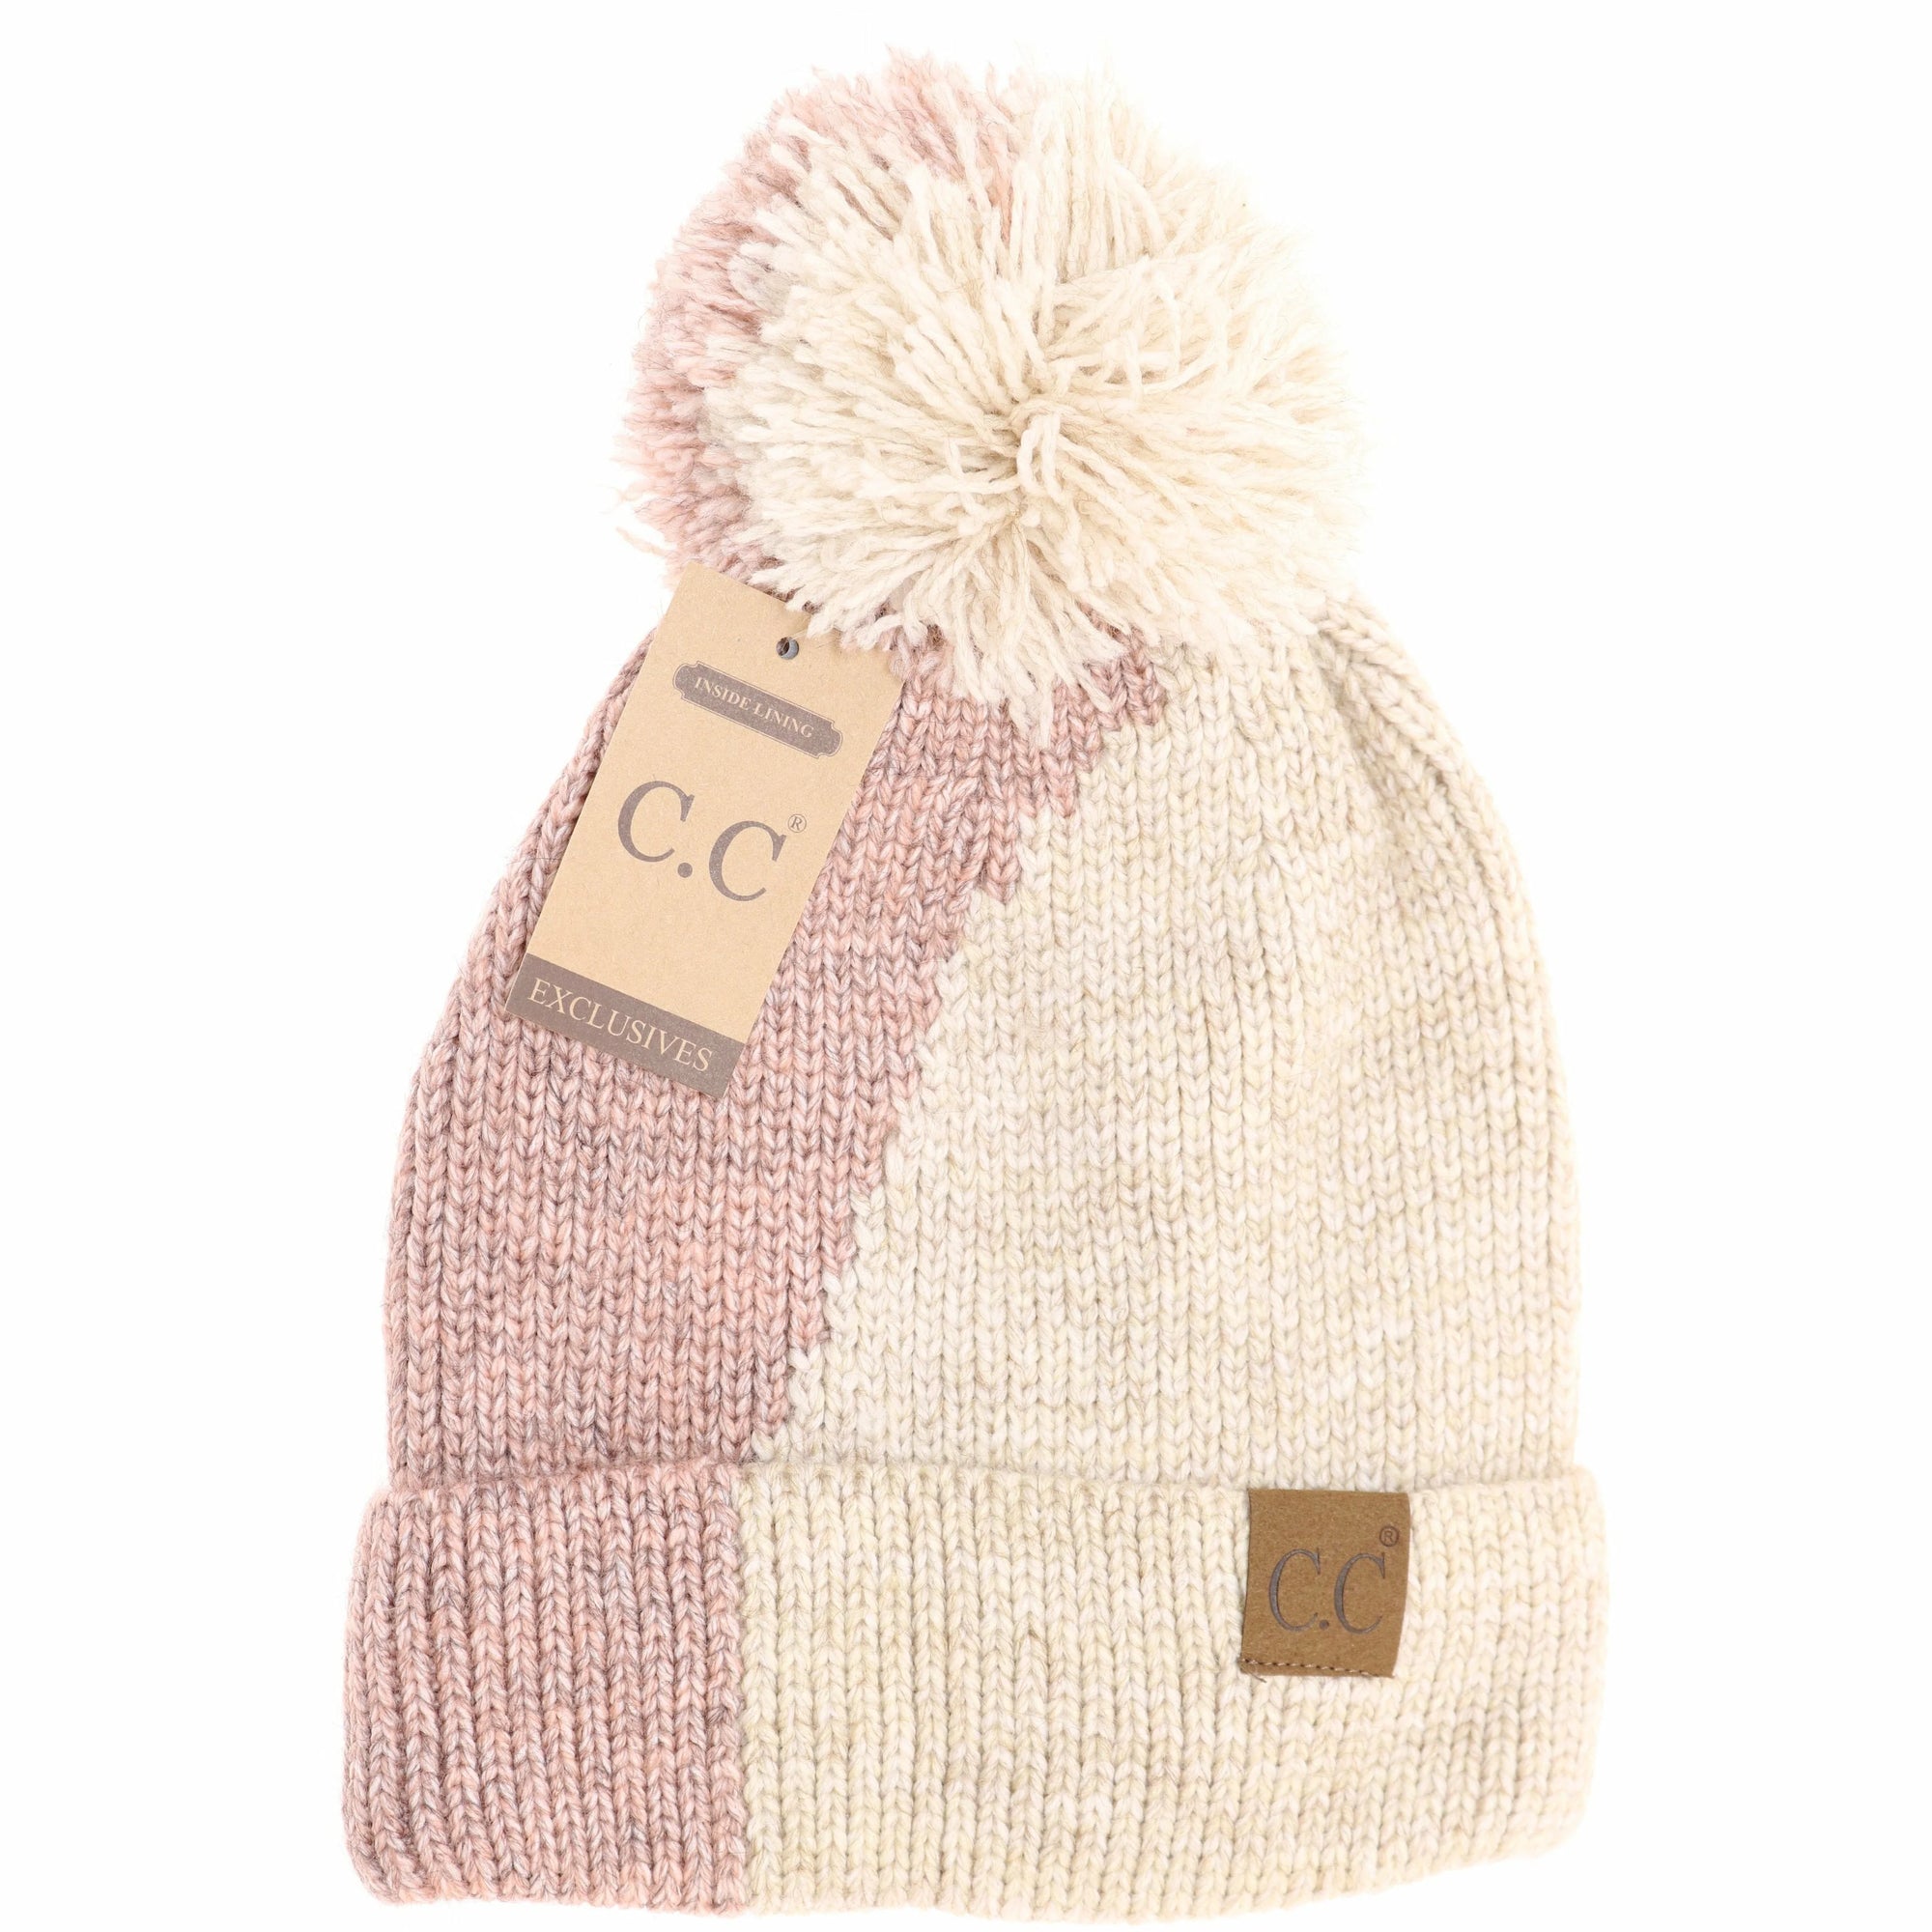 Two Tone Knit Beanie in Rose